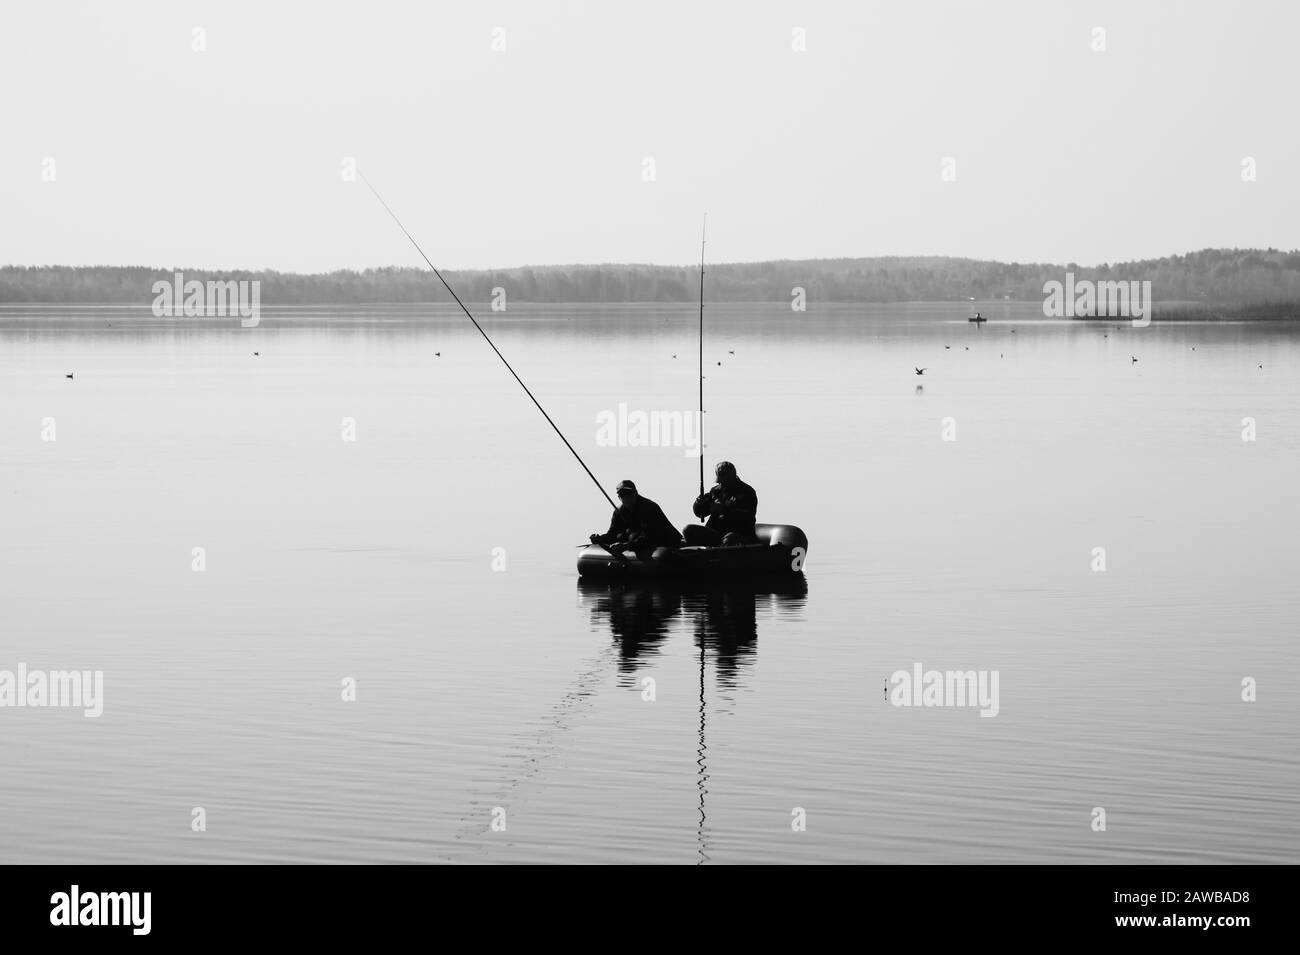 Fishermen catching fish. silhouette of fishers on a fishing boat. calm background Stock Photo